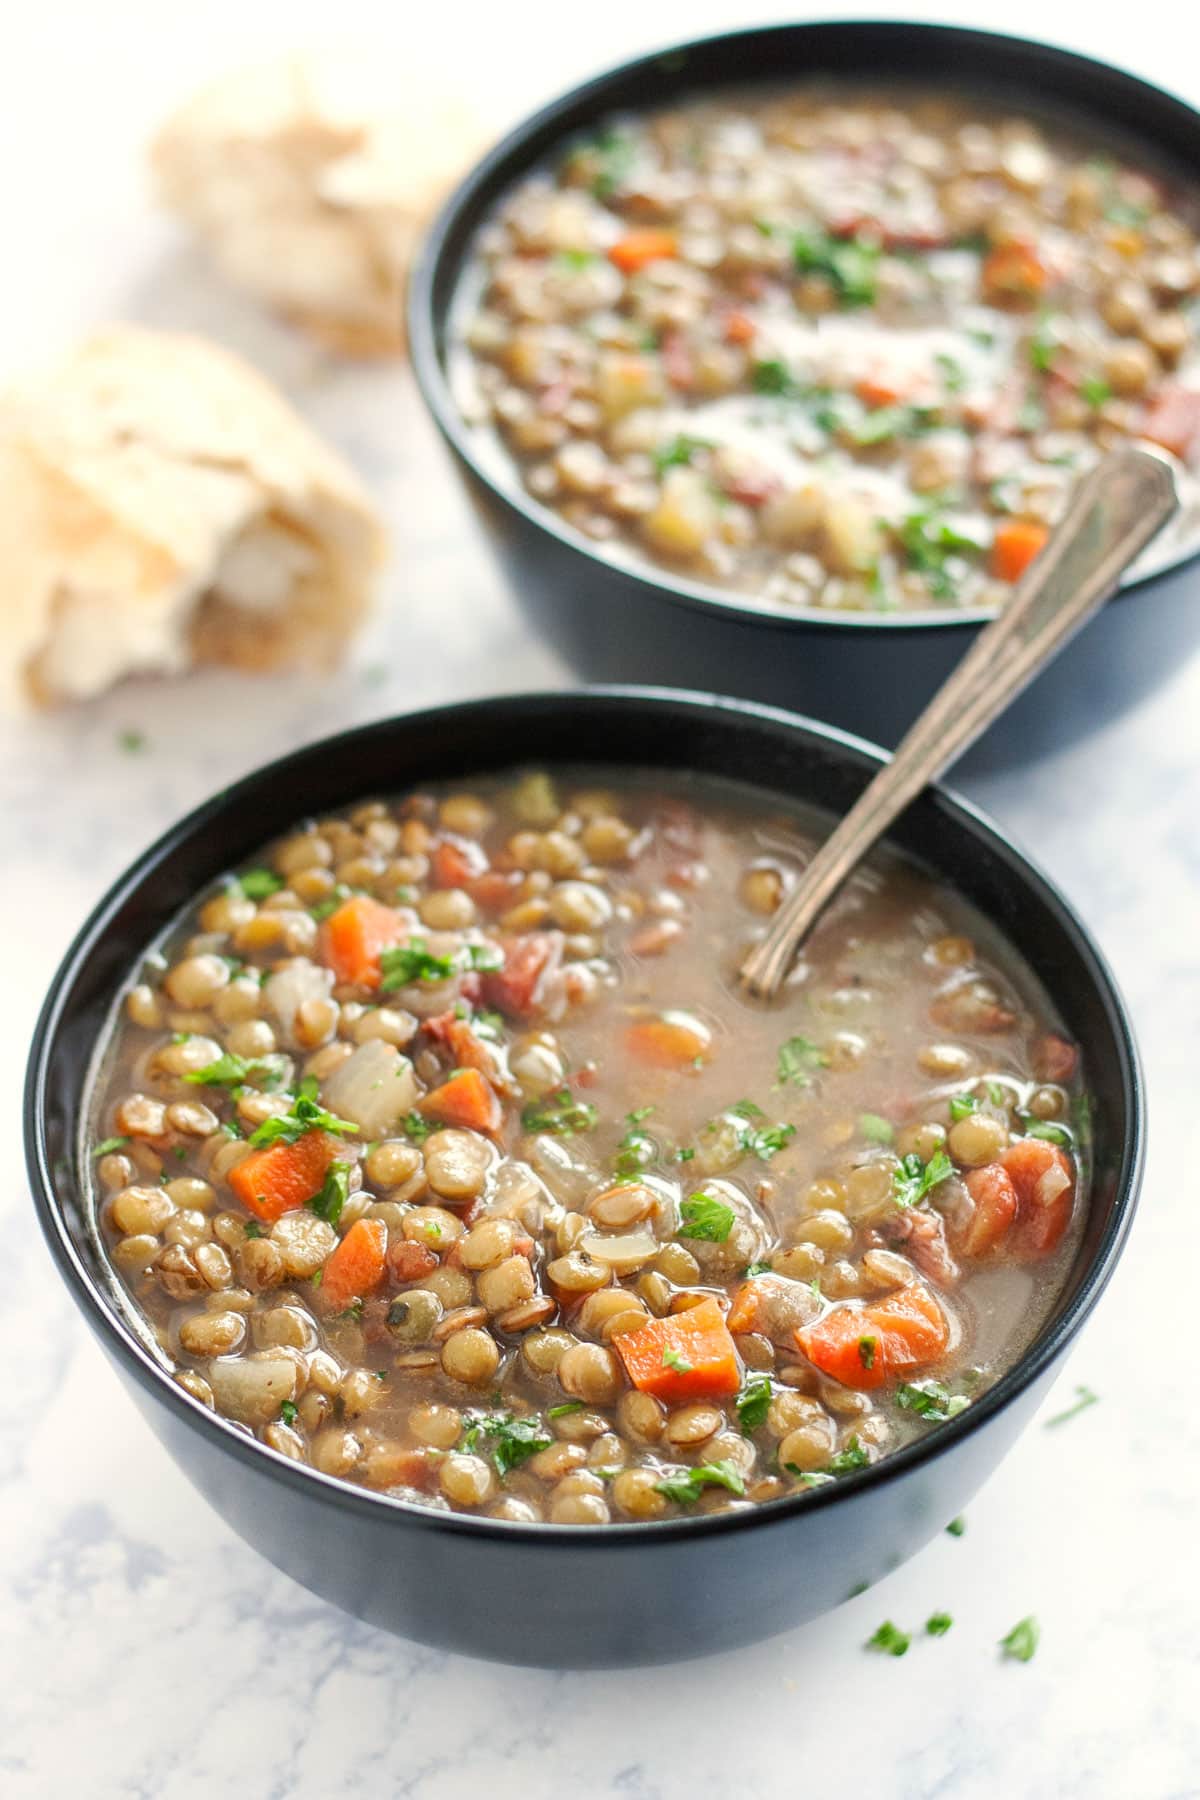 Two black bowls of lentil soup with bread next to it and a spoon in the front bowl.